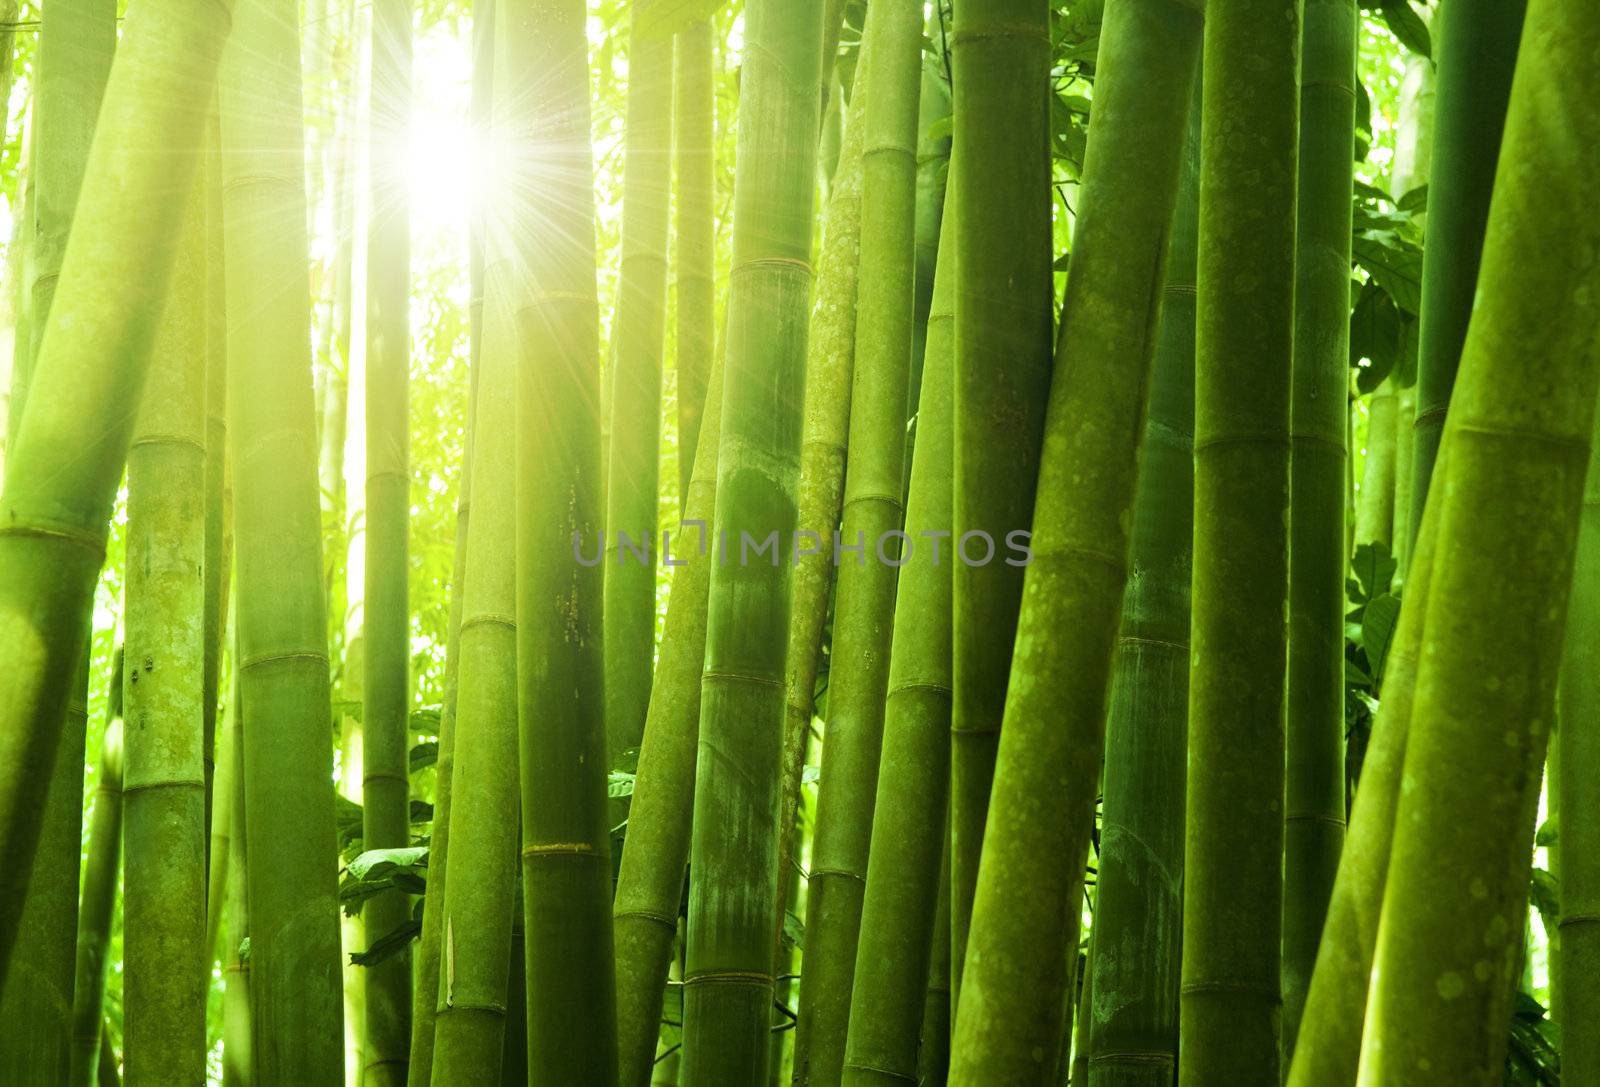 Asian Bamboo forest with morning sunlight.